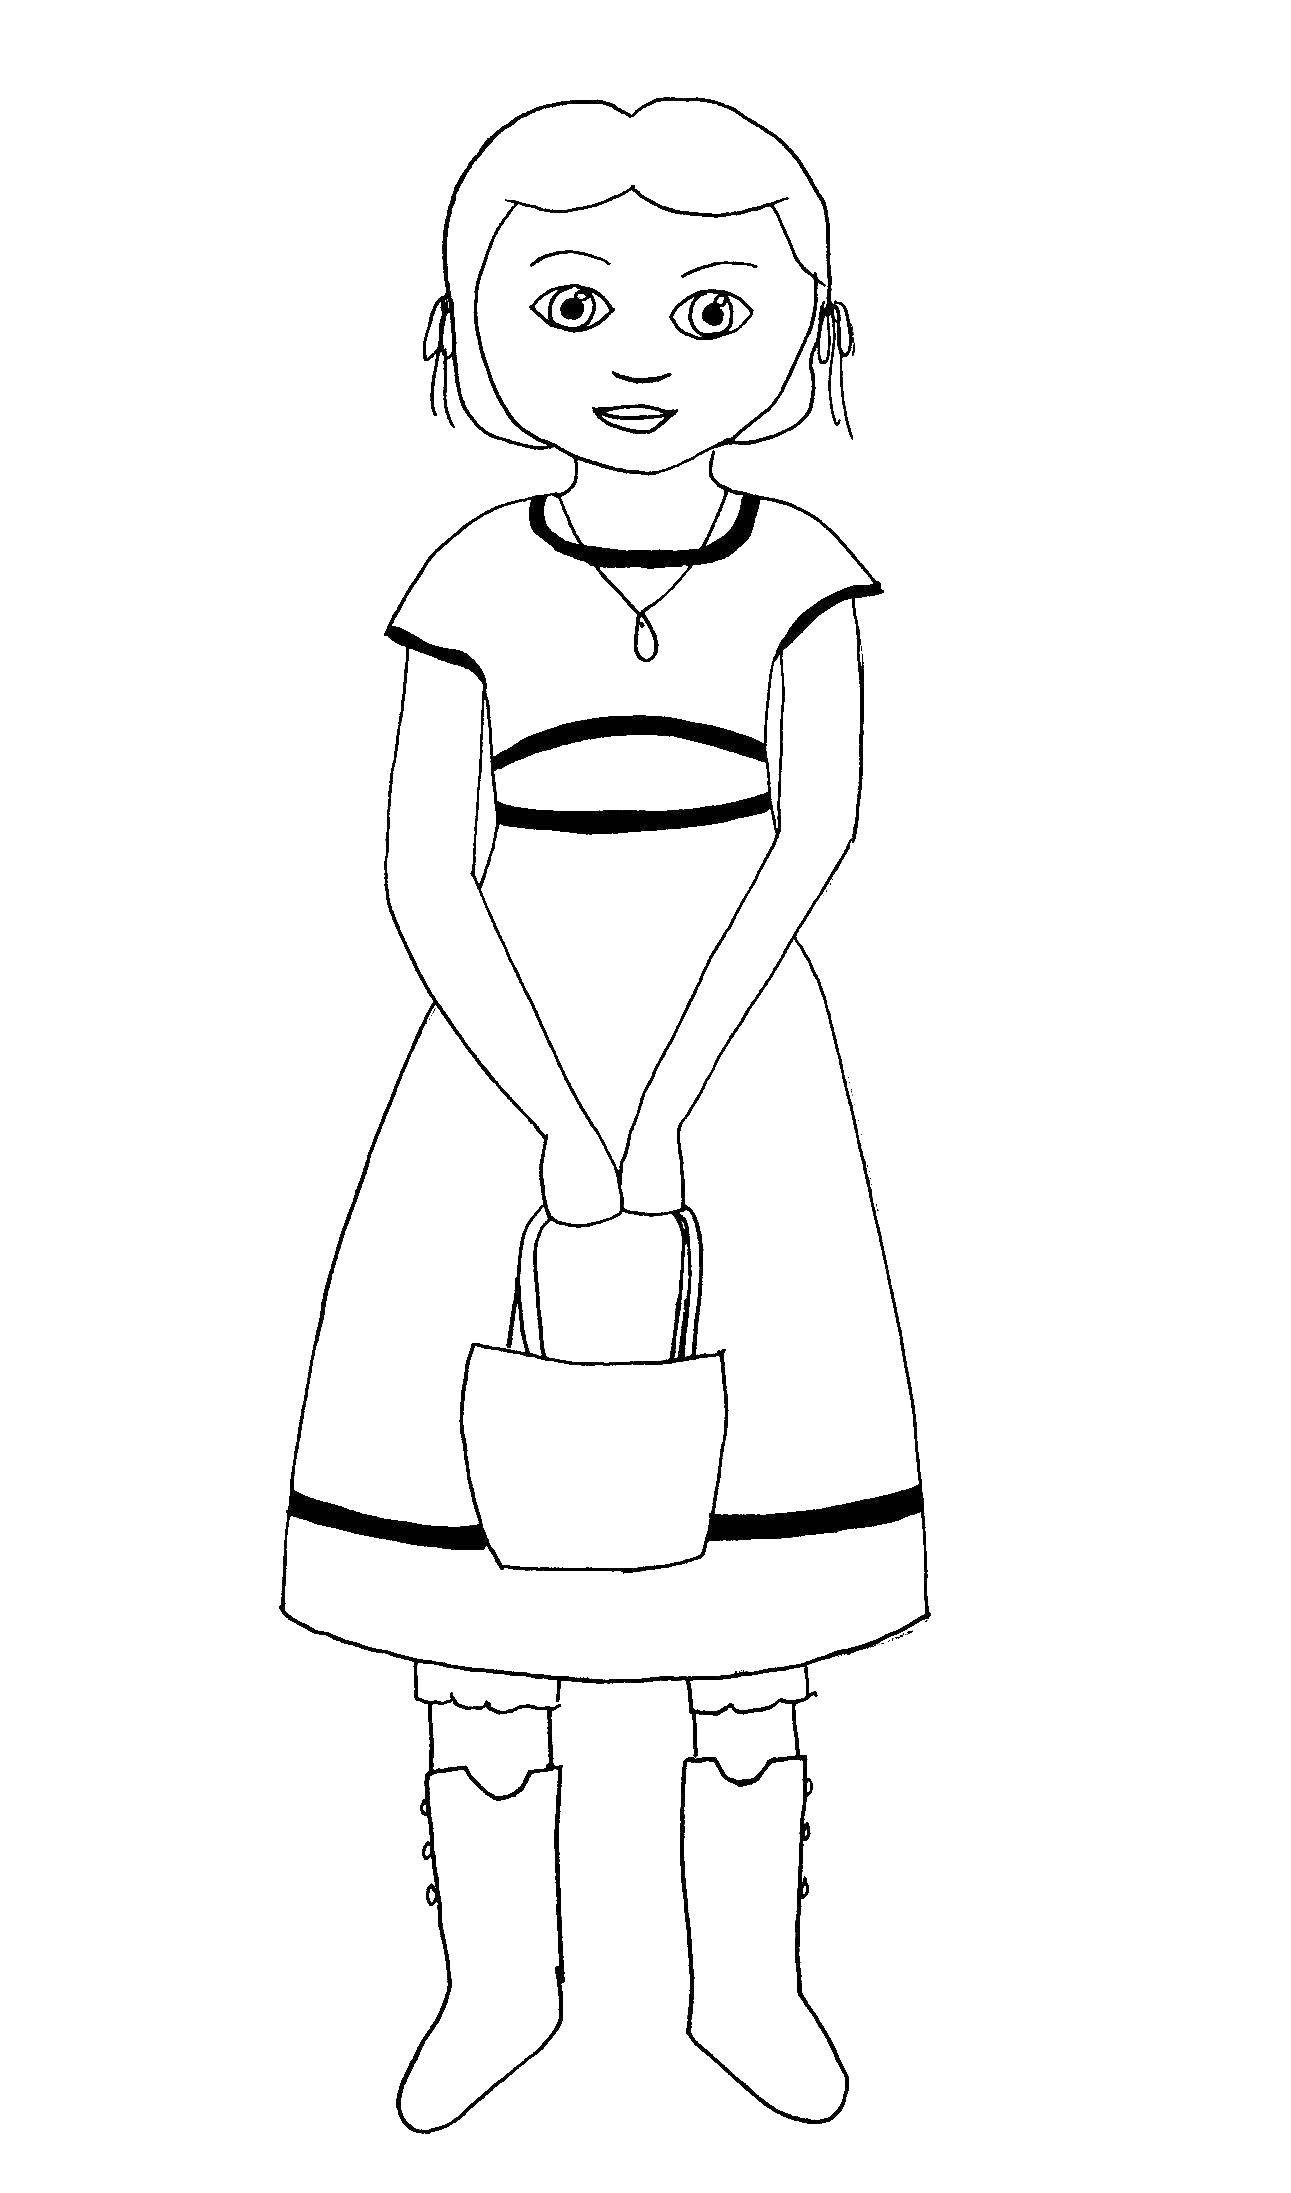 Coloring The girl with the bag and boots. Category For girls. Tags:  girl.